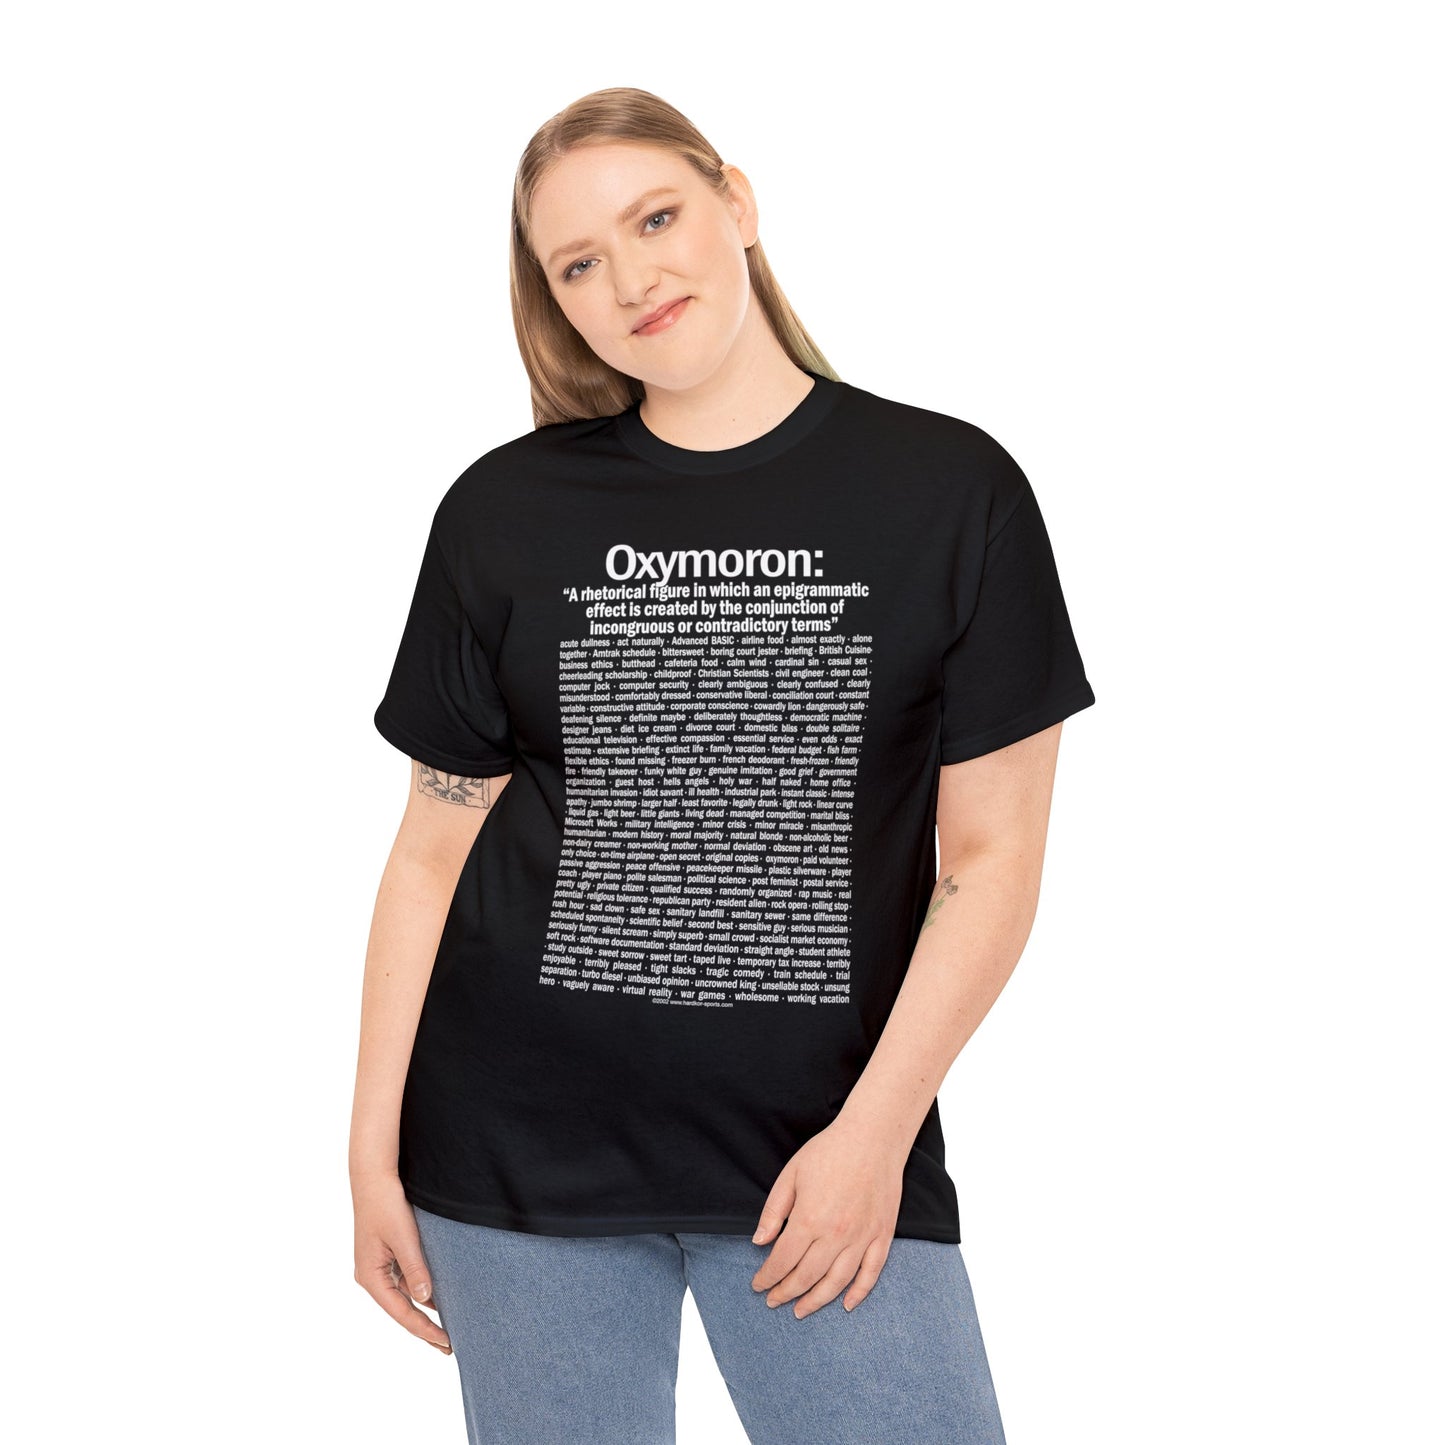 Oxymoron T-Shirts, Funny Oxymoron Saying, Government Intelligence, Clean Coal, Pretty Ugly and More, English Majors, Teacher T-shirts